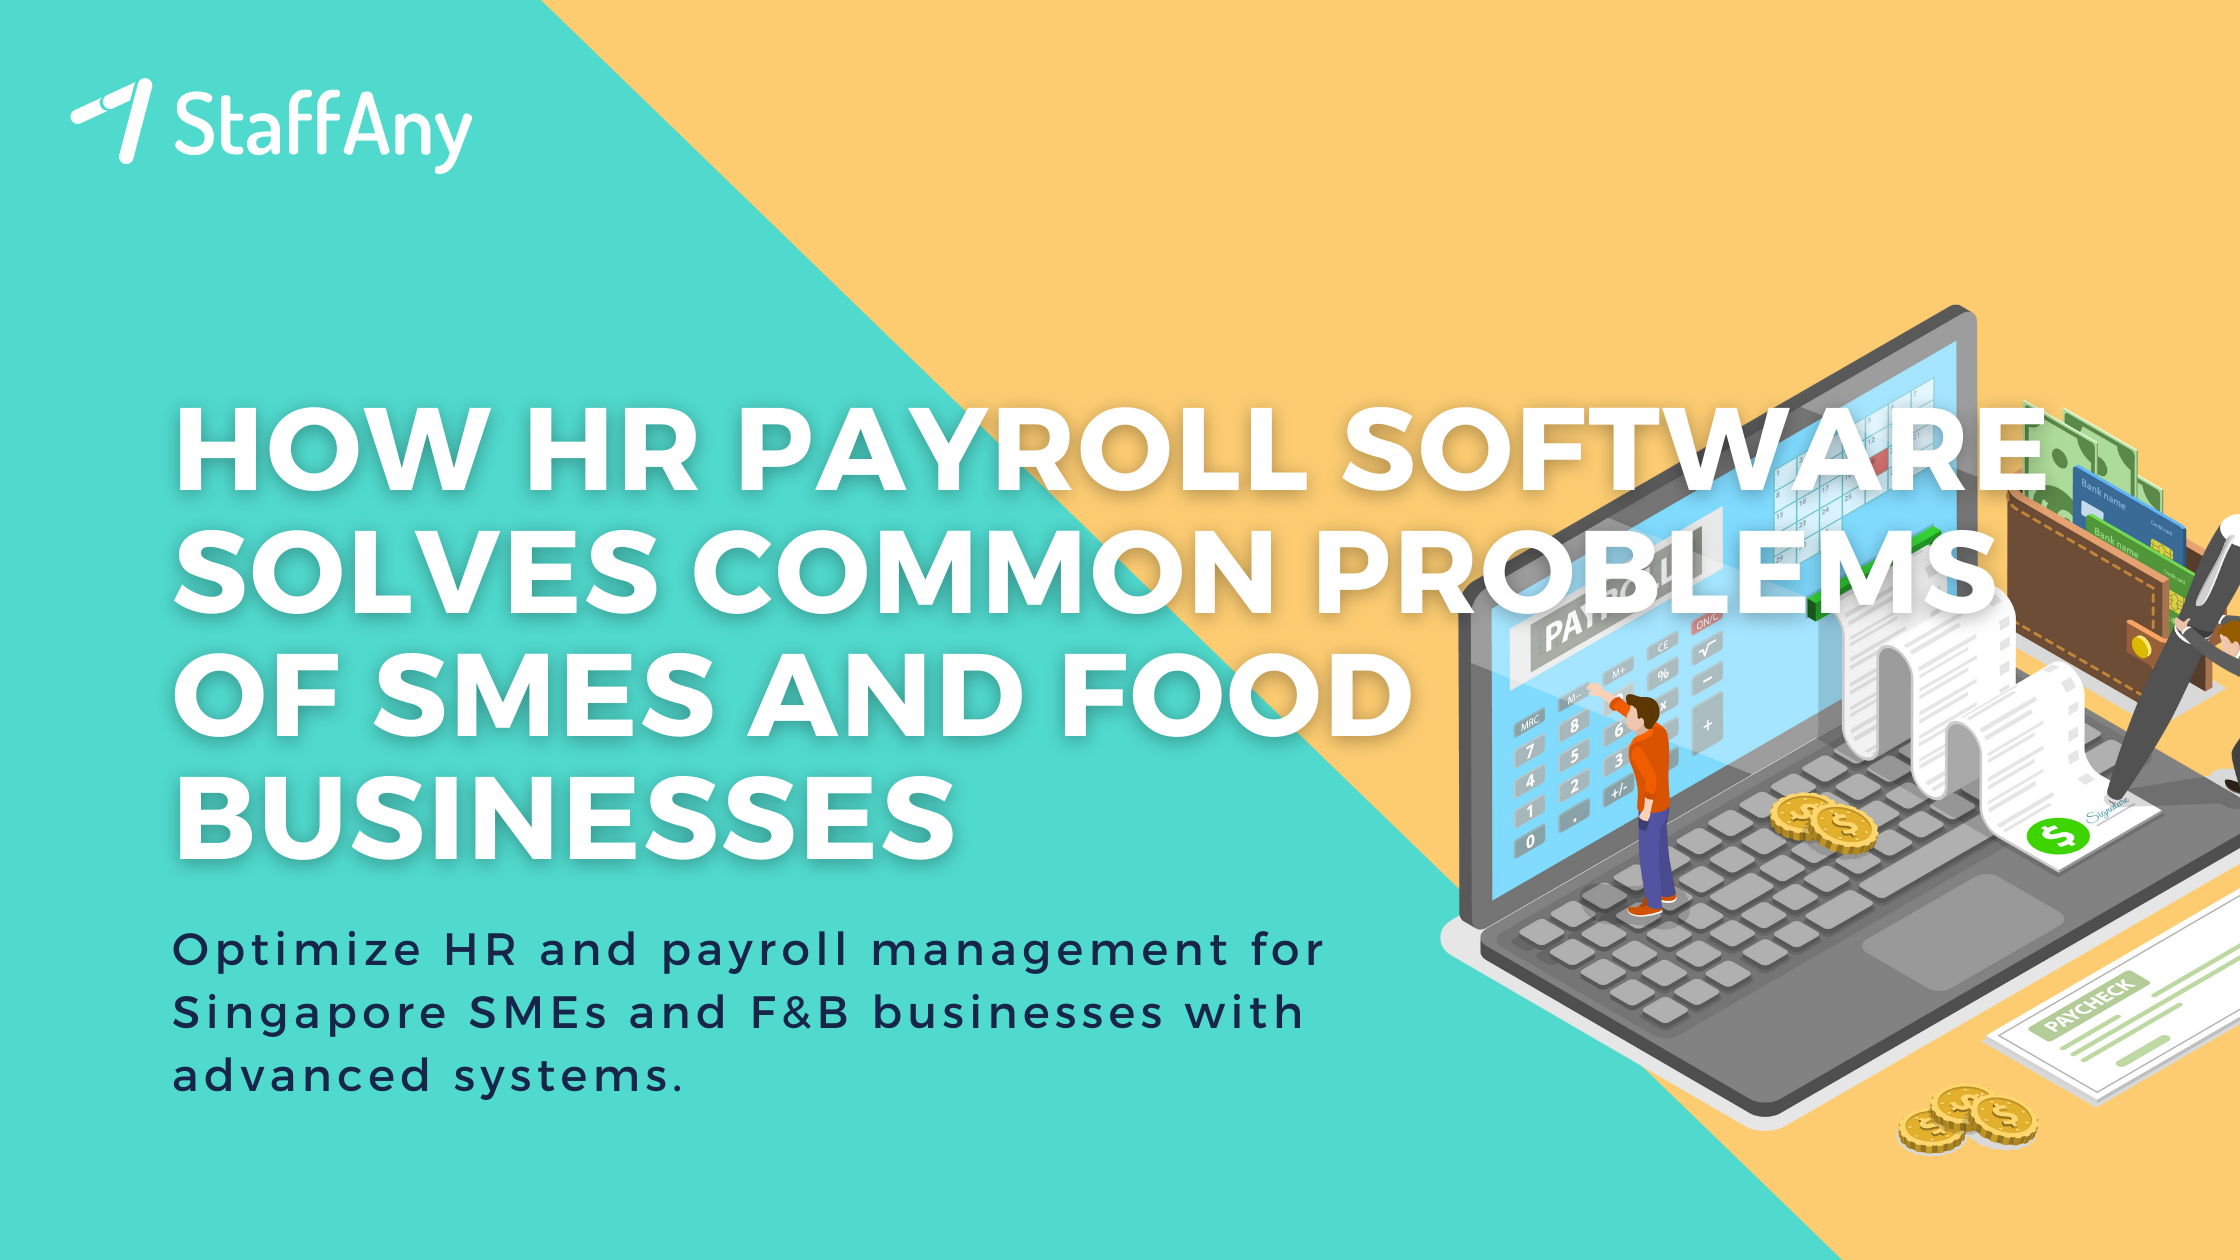 How HR Payroll Software Solves Common Problems of SMEs and Food Businesses